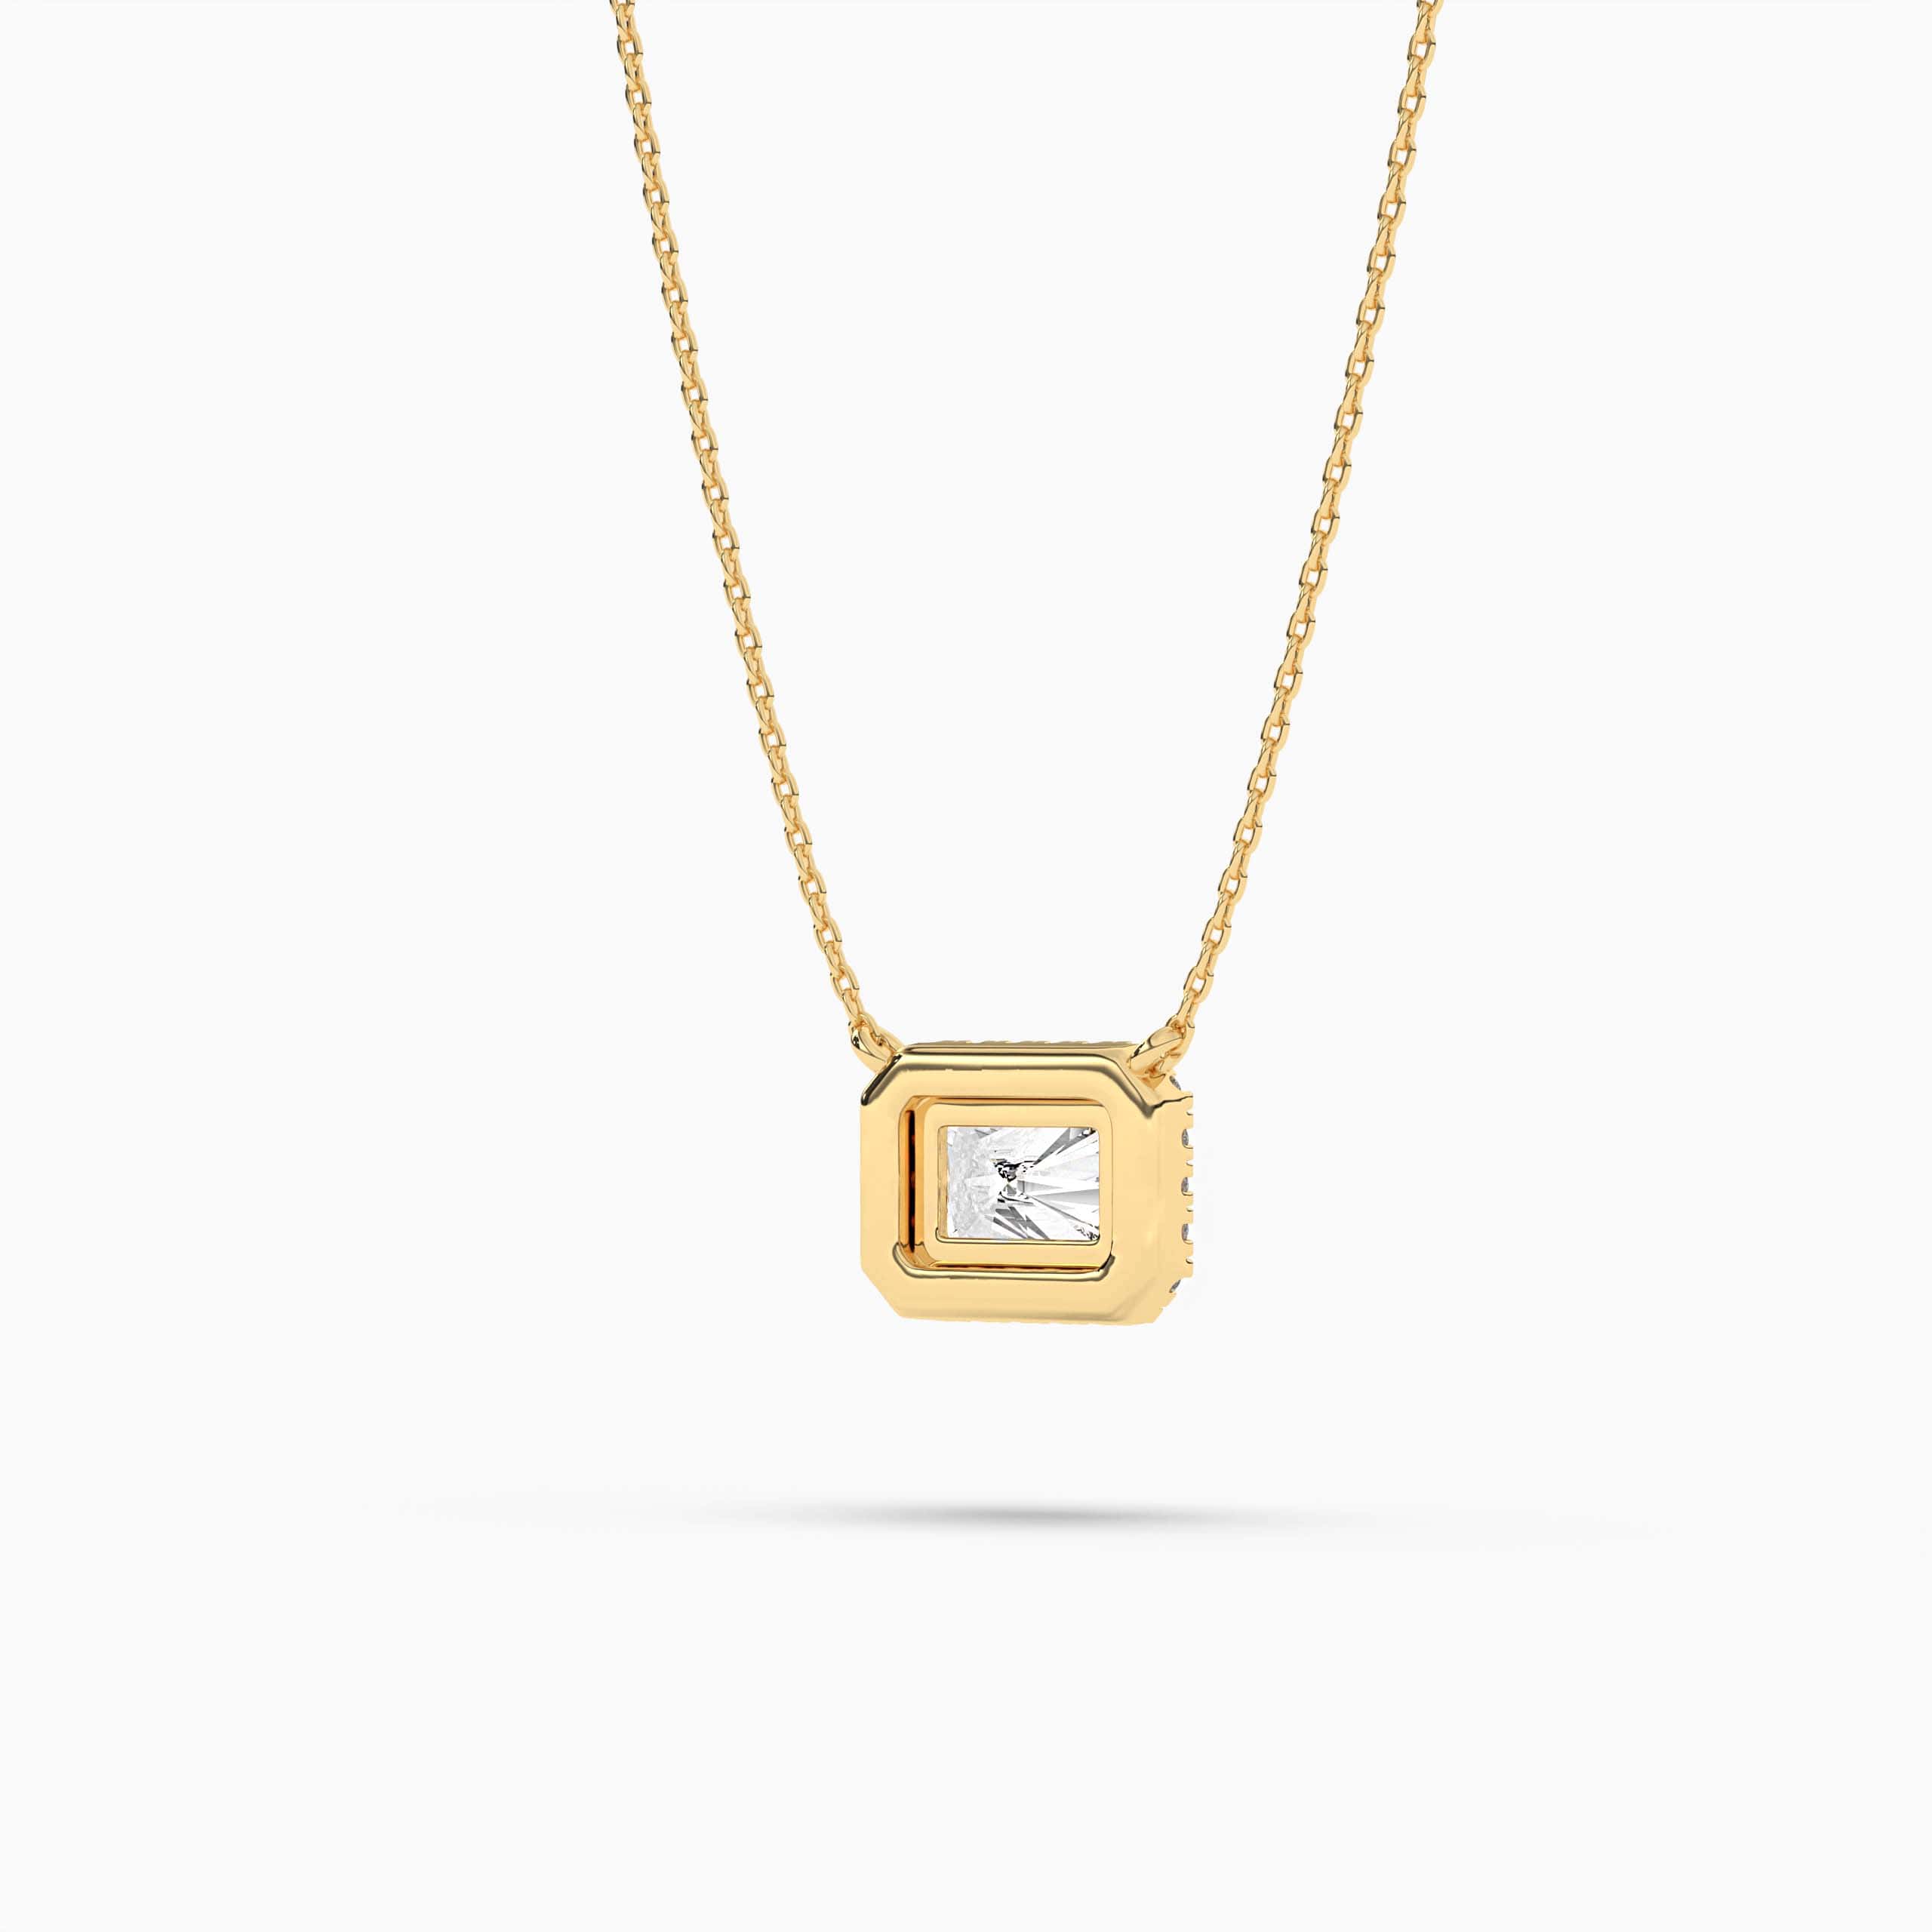 EAST WEST RADIANT PENDANT NECKLACE YELLOW GOLD